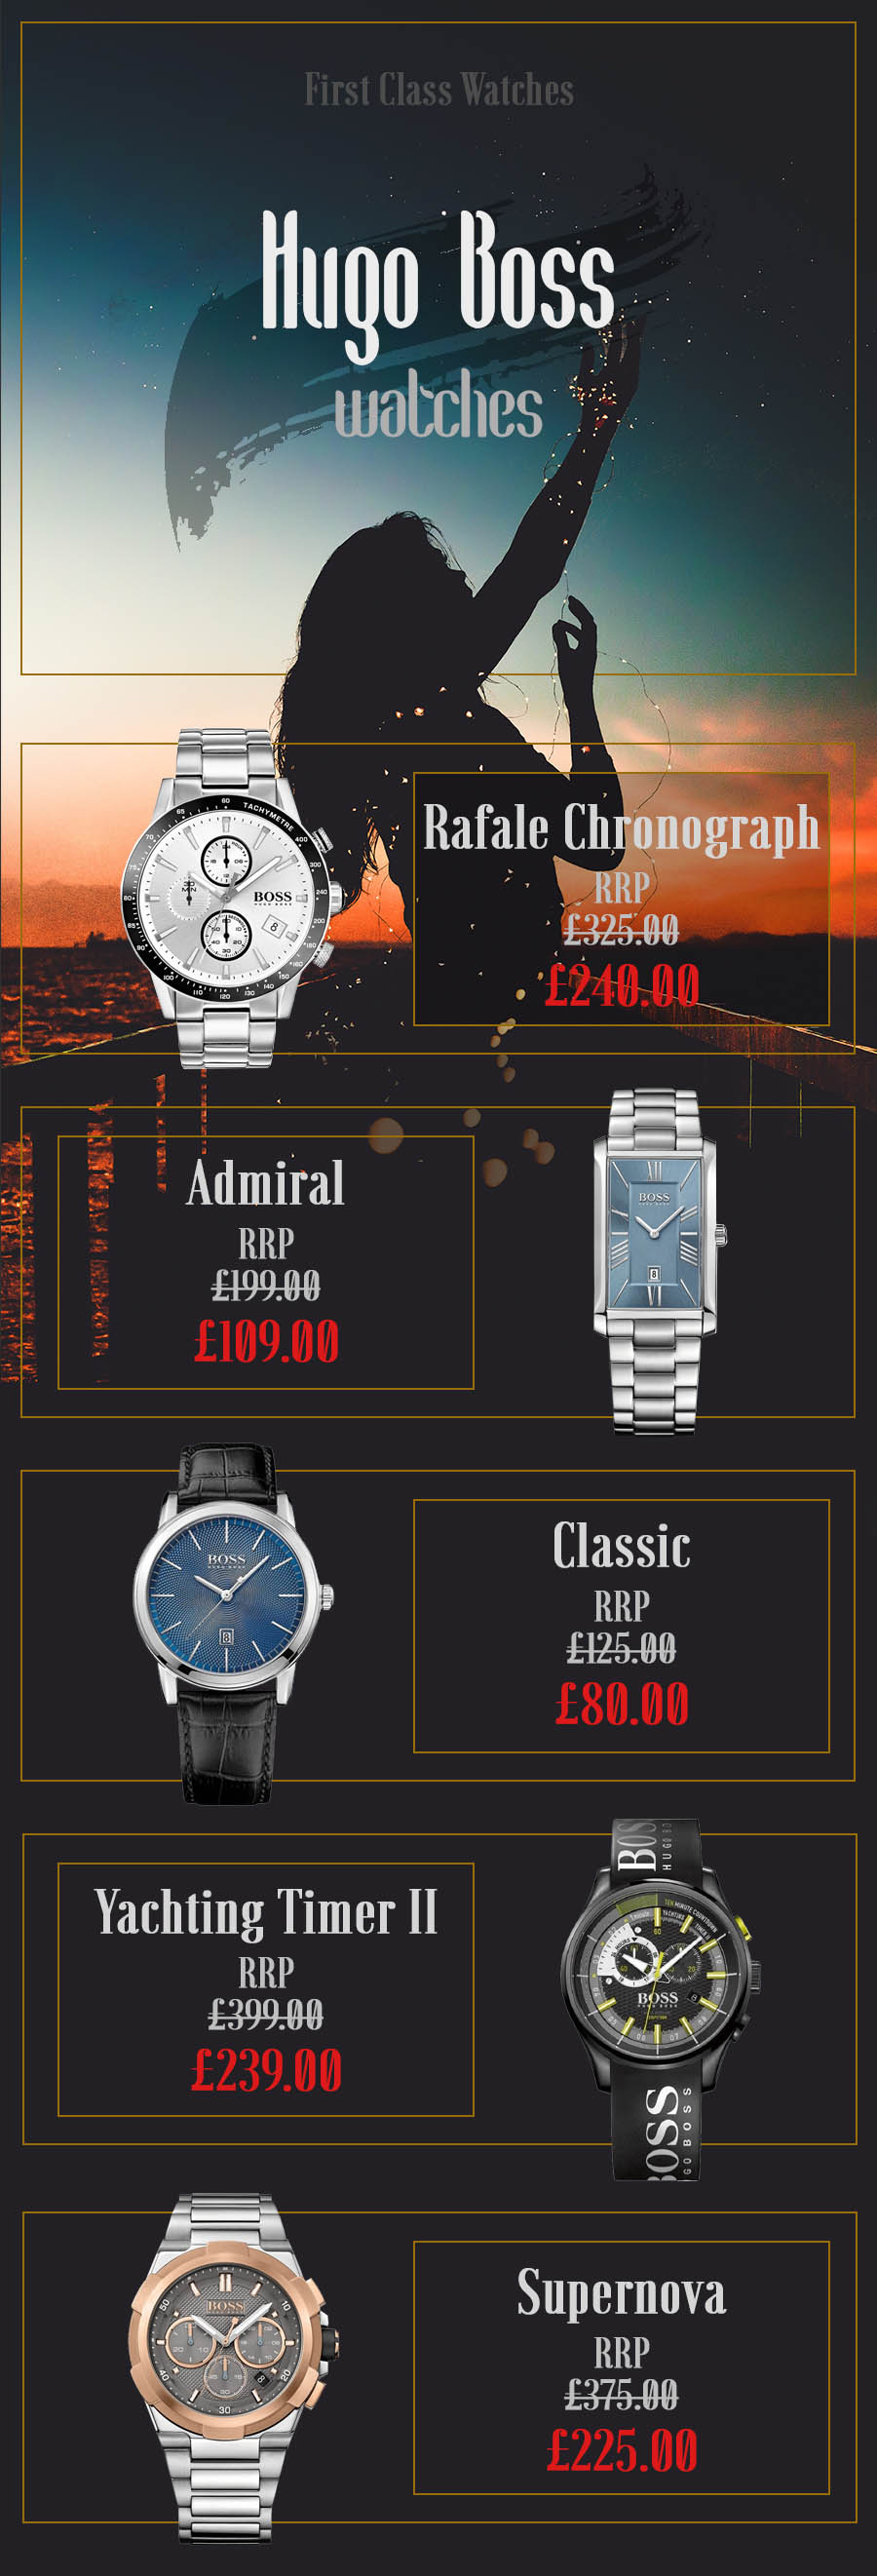 most expensive hugo watch